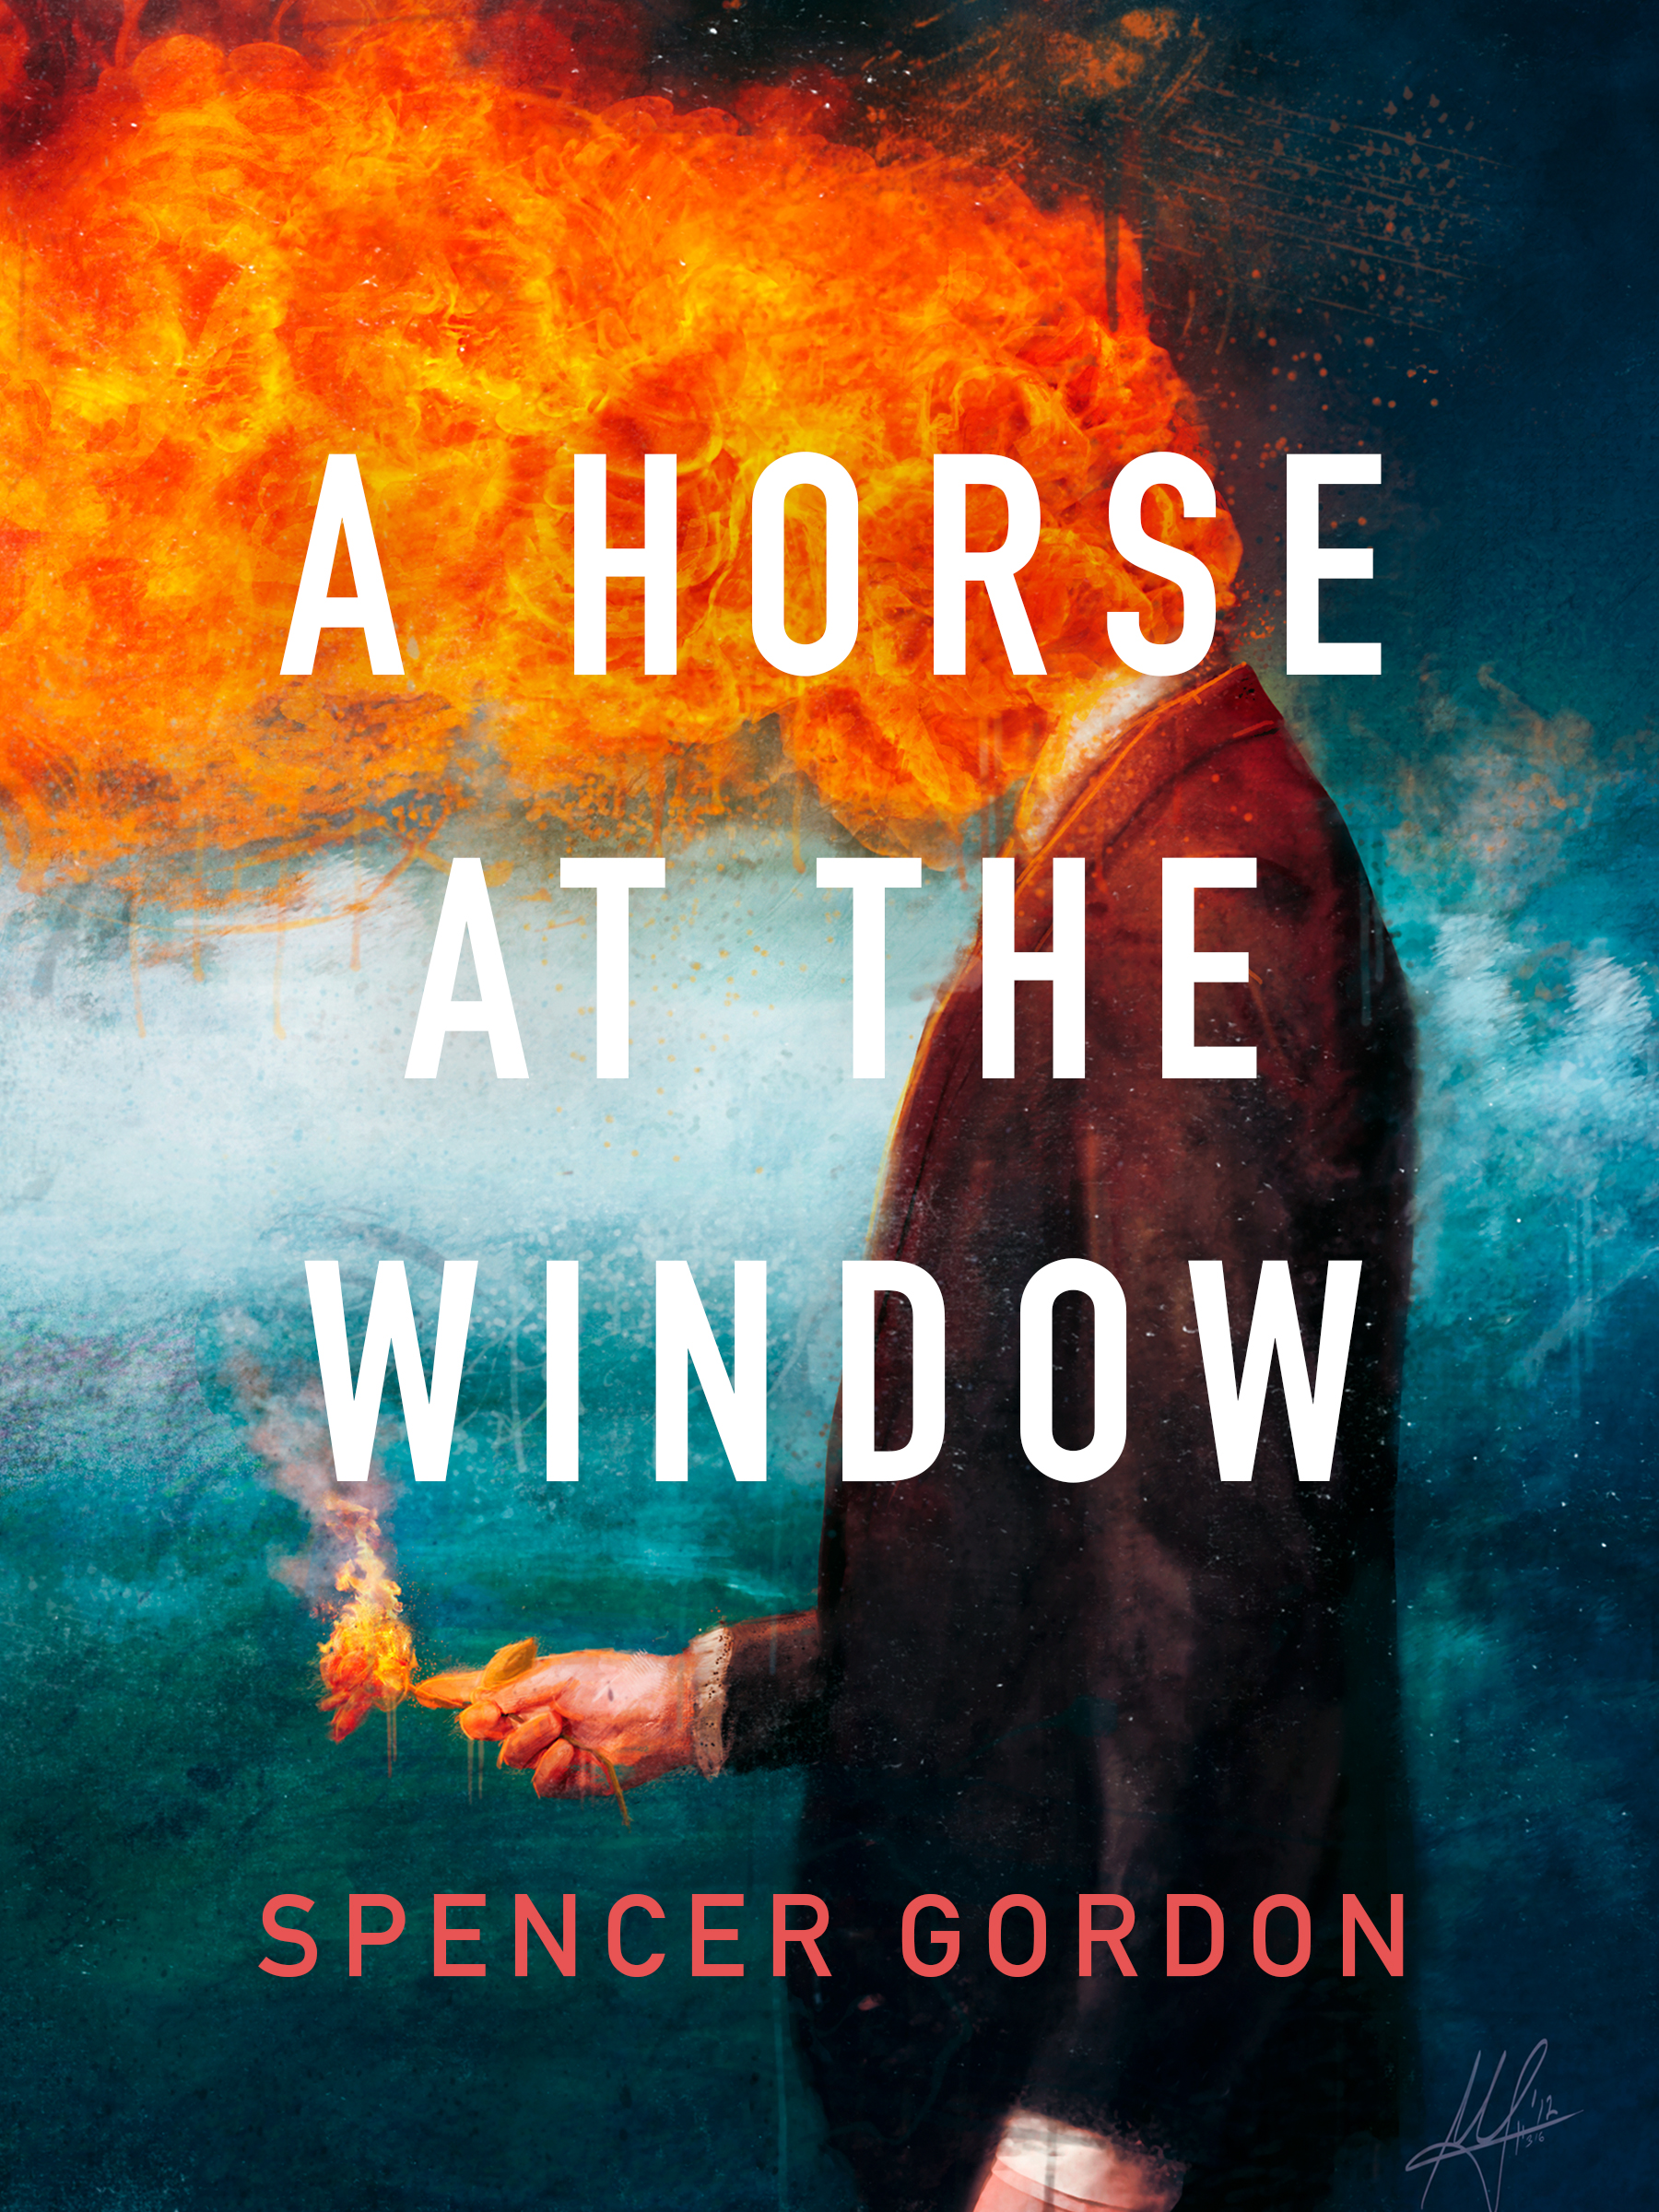 Book cover of A Horse at the Window by Spencer Gordon depicts a person standing in profile in a dark coat; his head is obscured by a gout of flame; he holds a burning flower in his right hand.